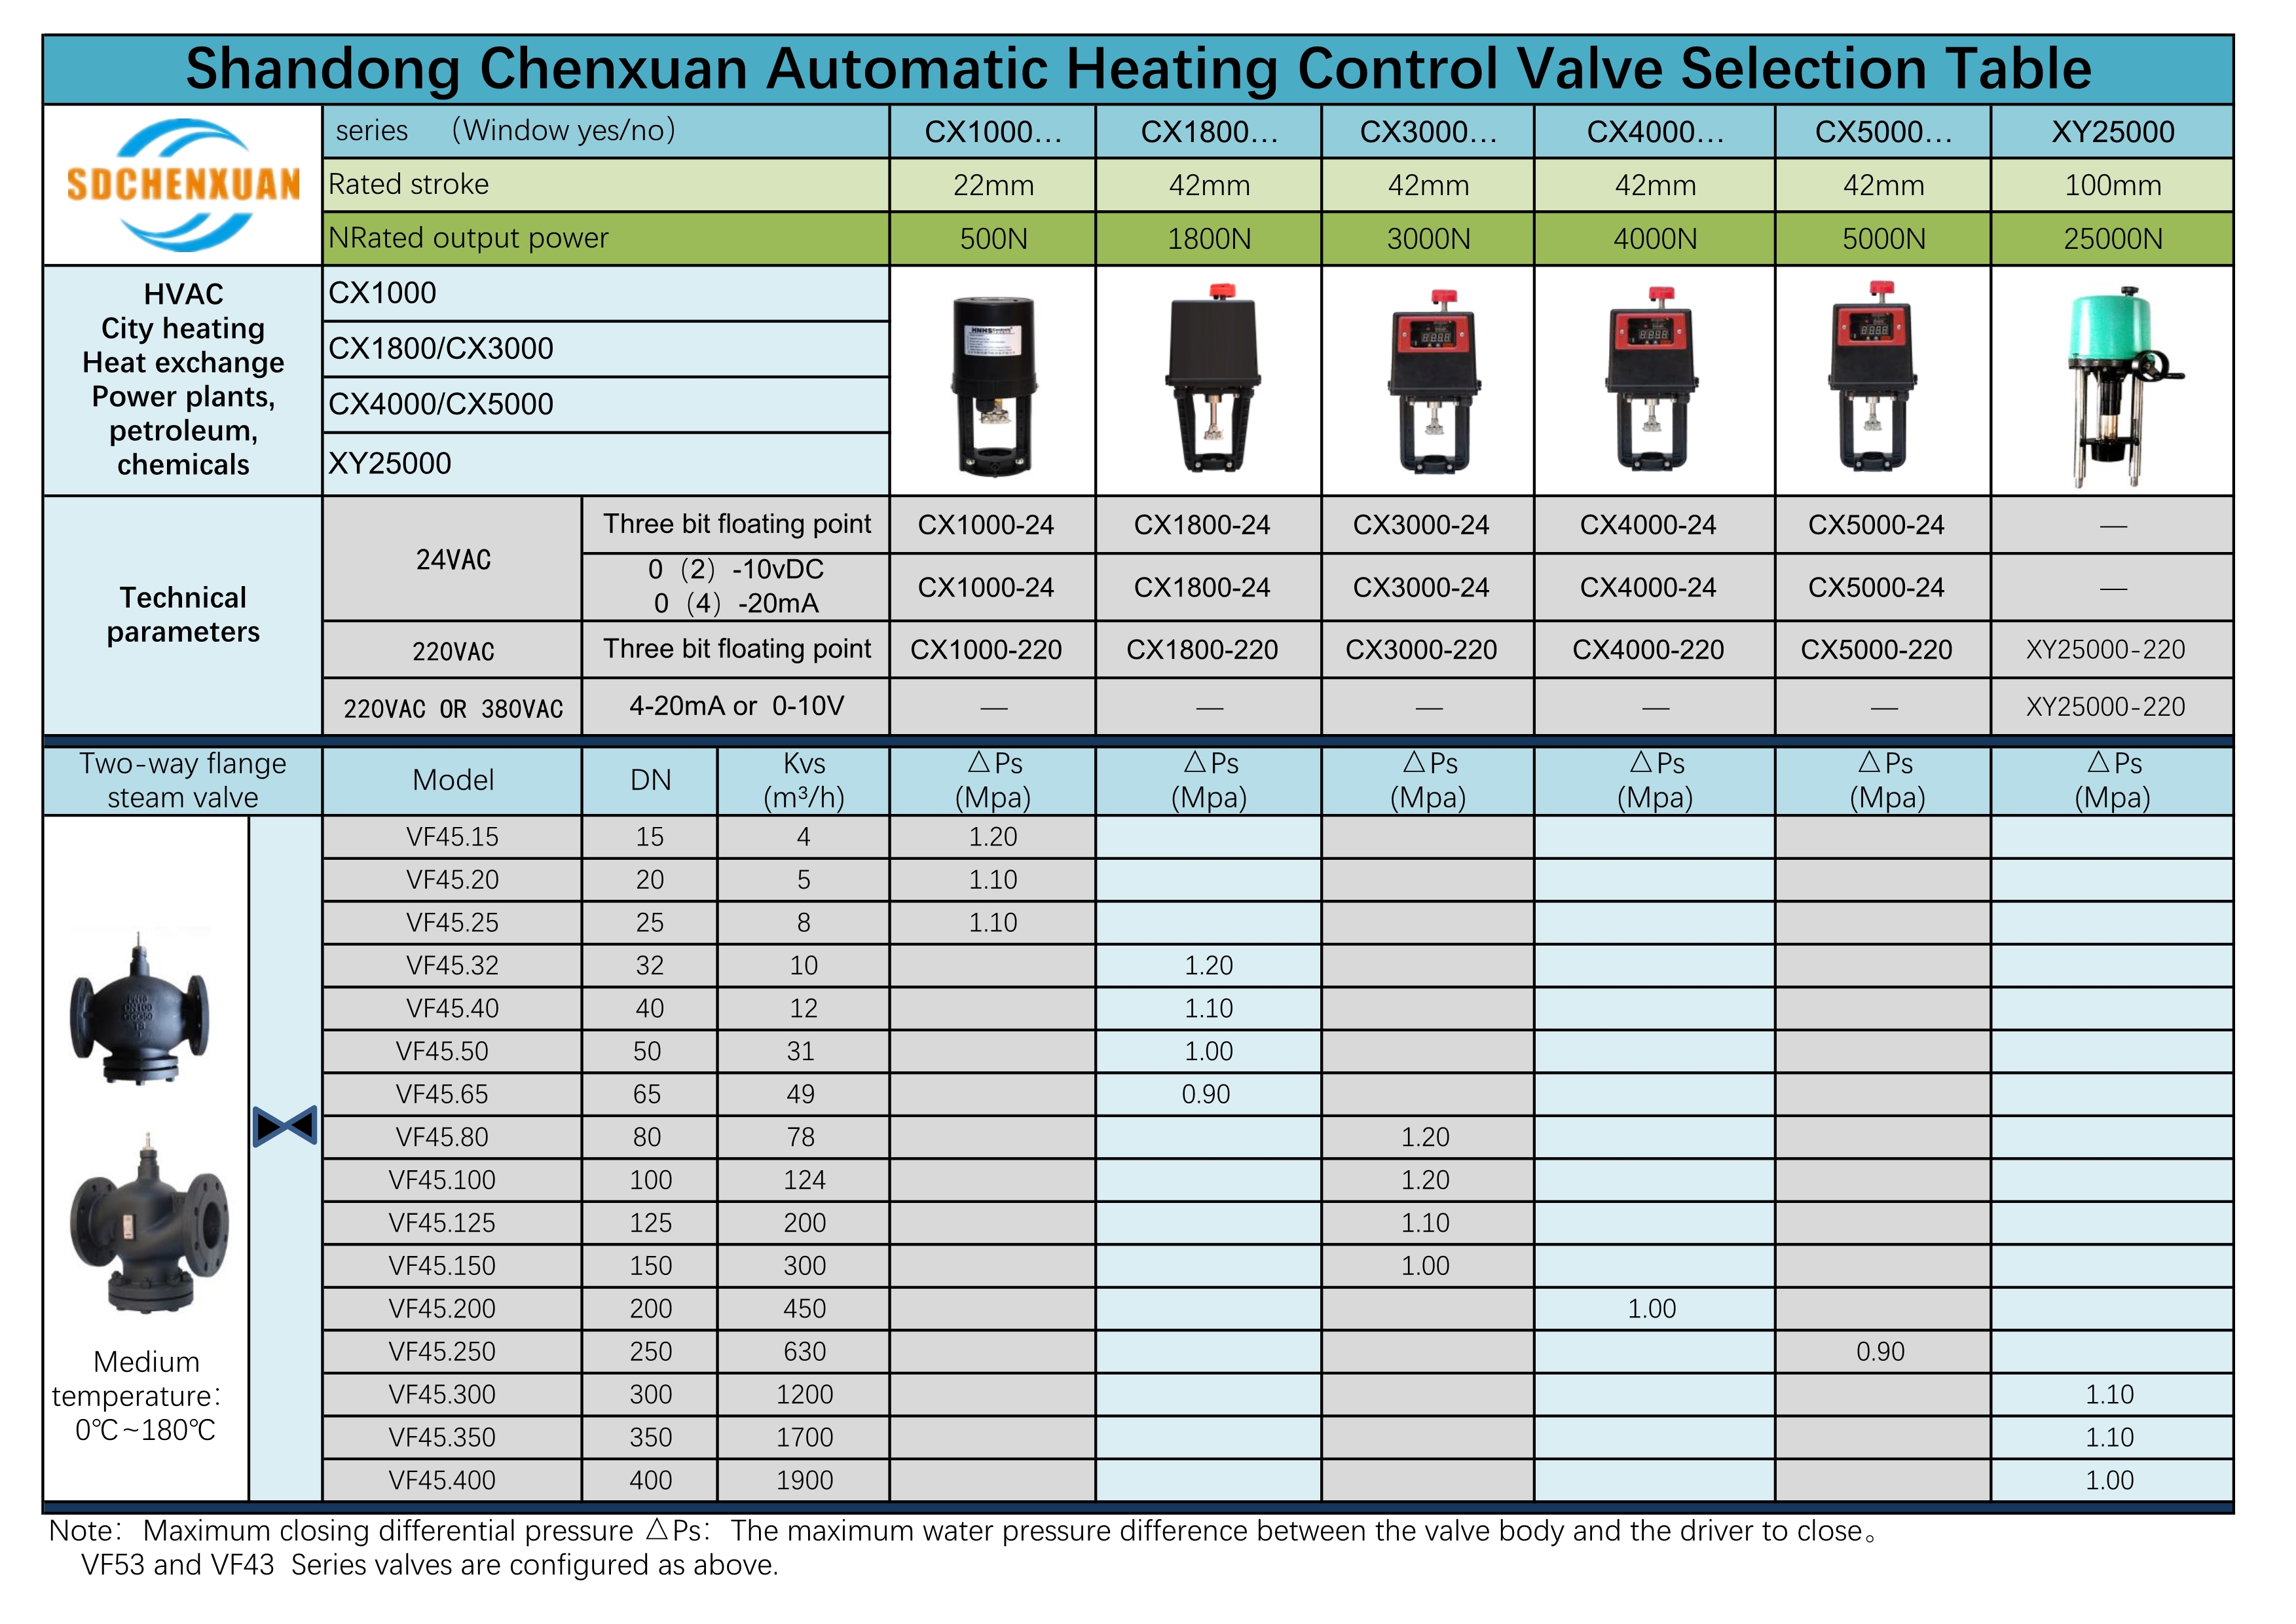 Shandong Chenxuan Automatic Heating Control Valve Selection Table